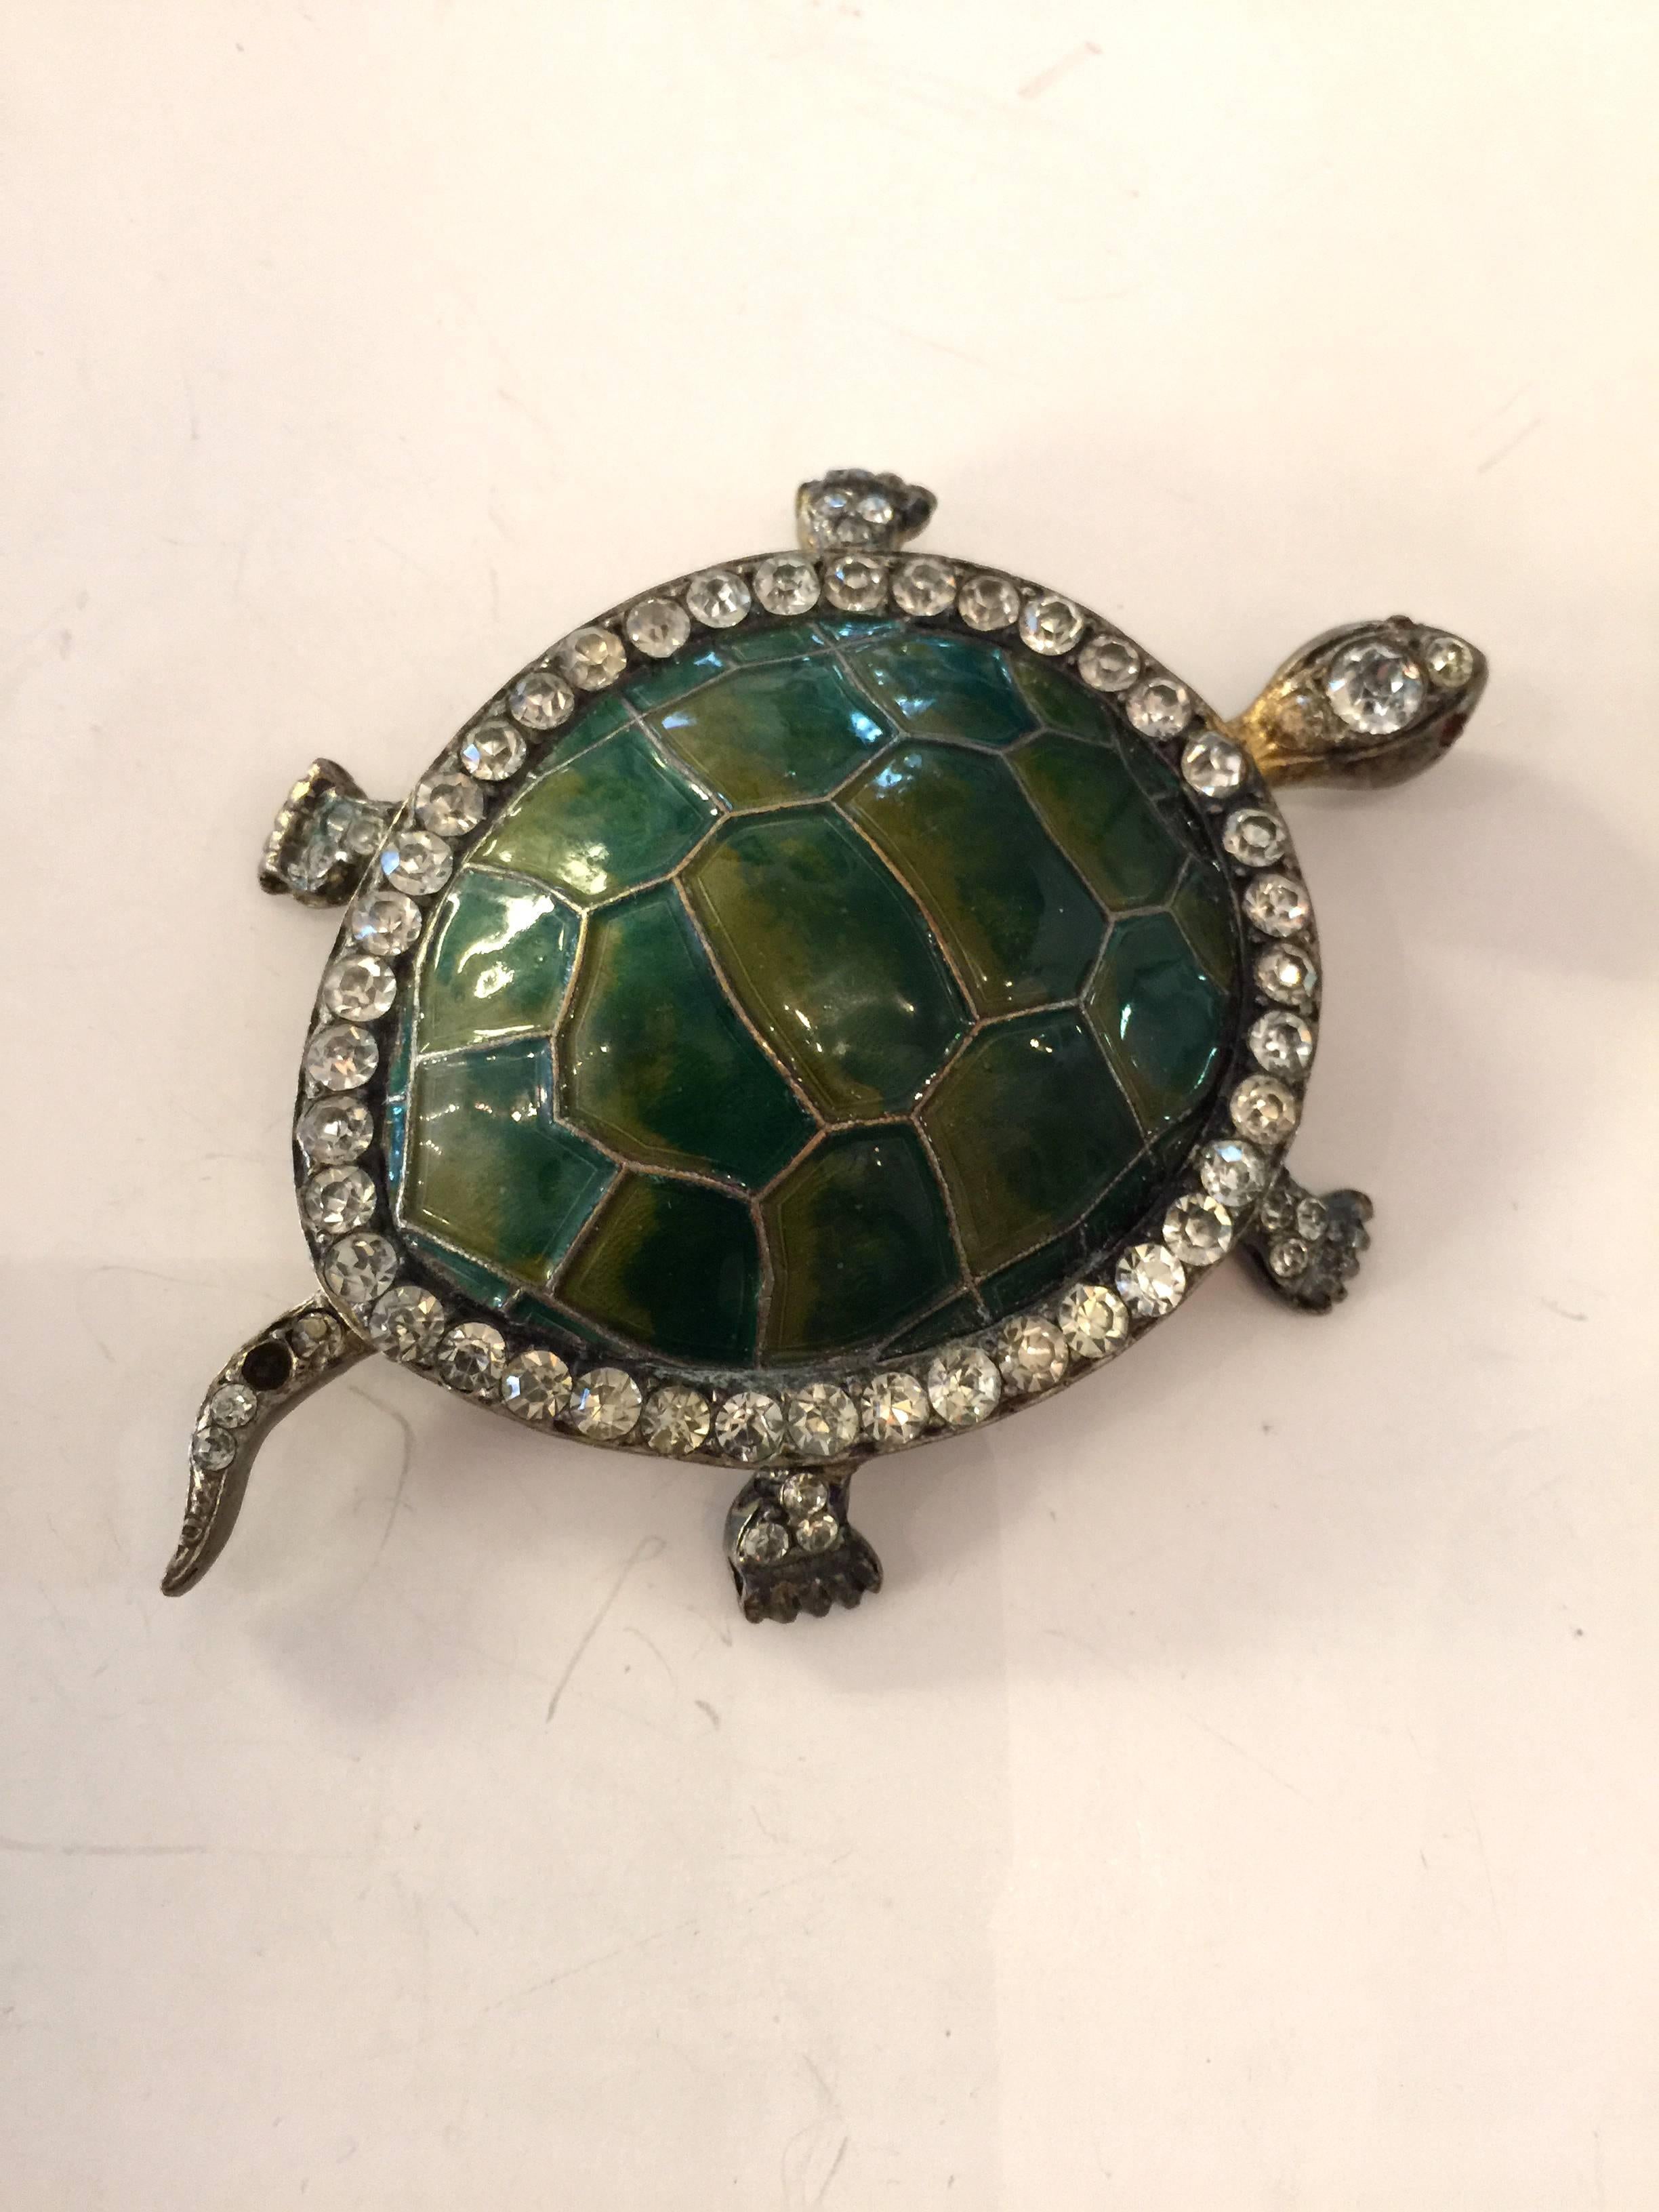 This unusual unsigned turtle pin dates from the 1940s era, and is an unusual hybrid. Its framework is goldtone, and is cast, and then has been encrusted with a border row of white rhinestones and has embellished red rhinestone eyes on this cute